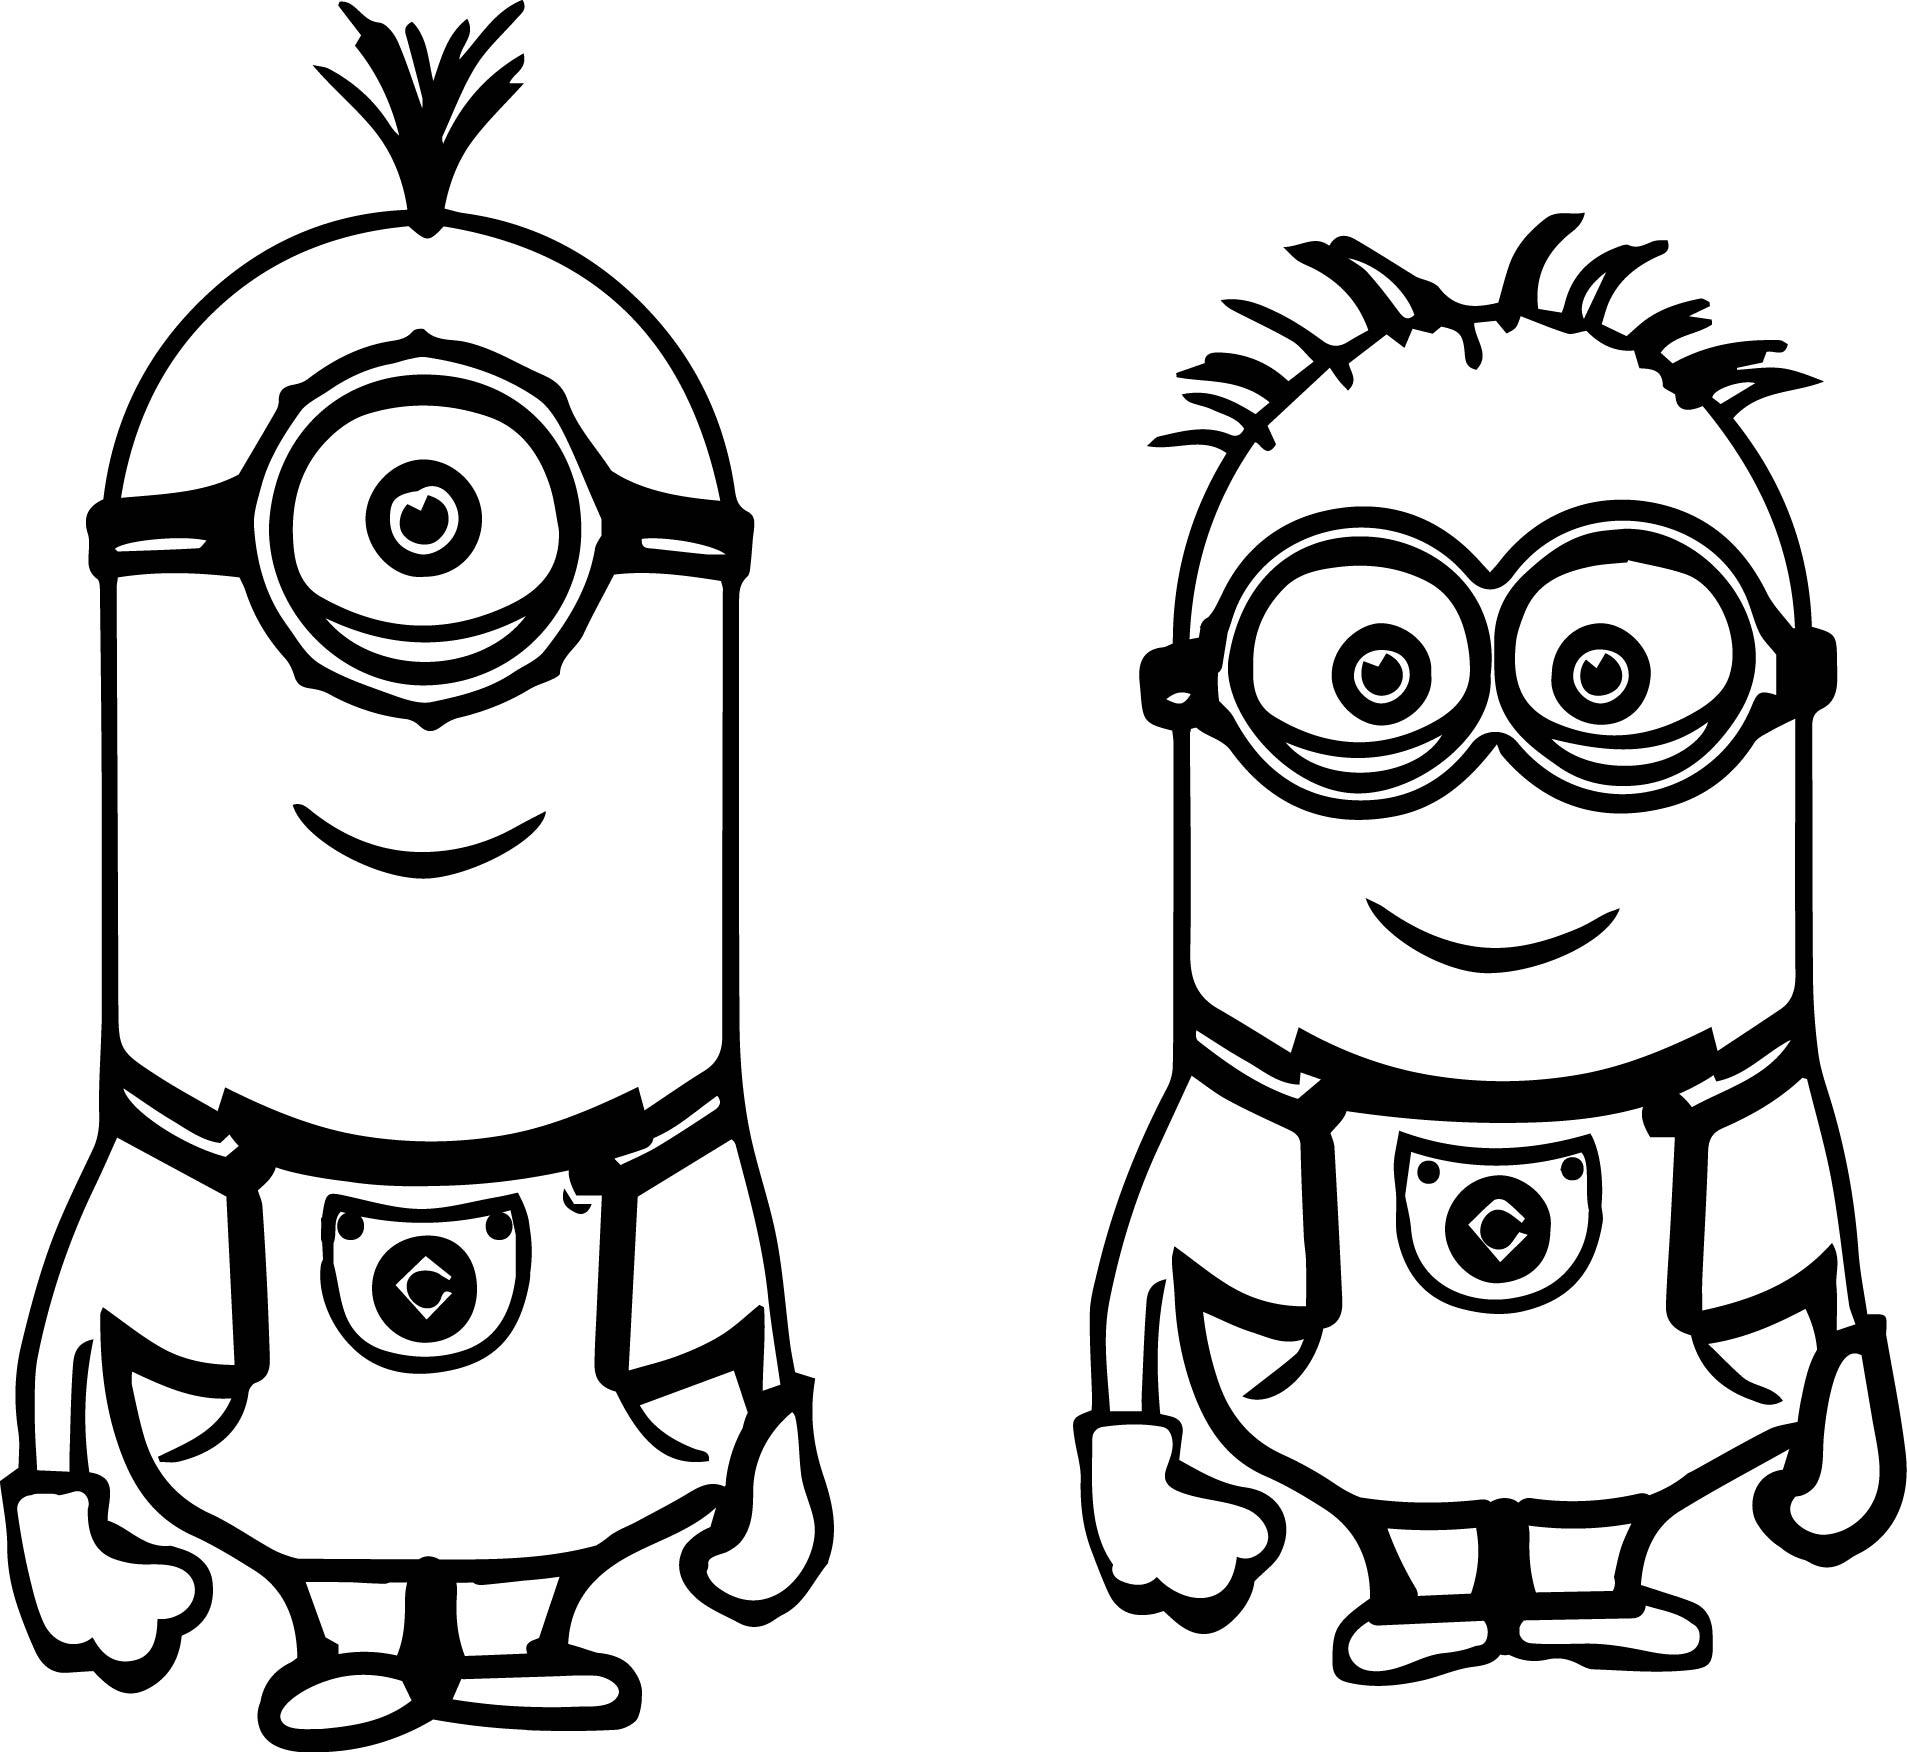 Minion Coloring Pages | Free download on ClipArtMag